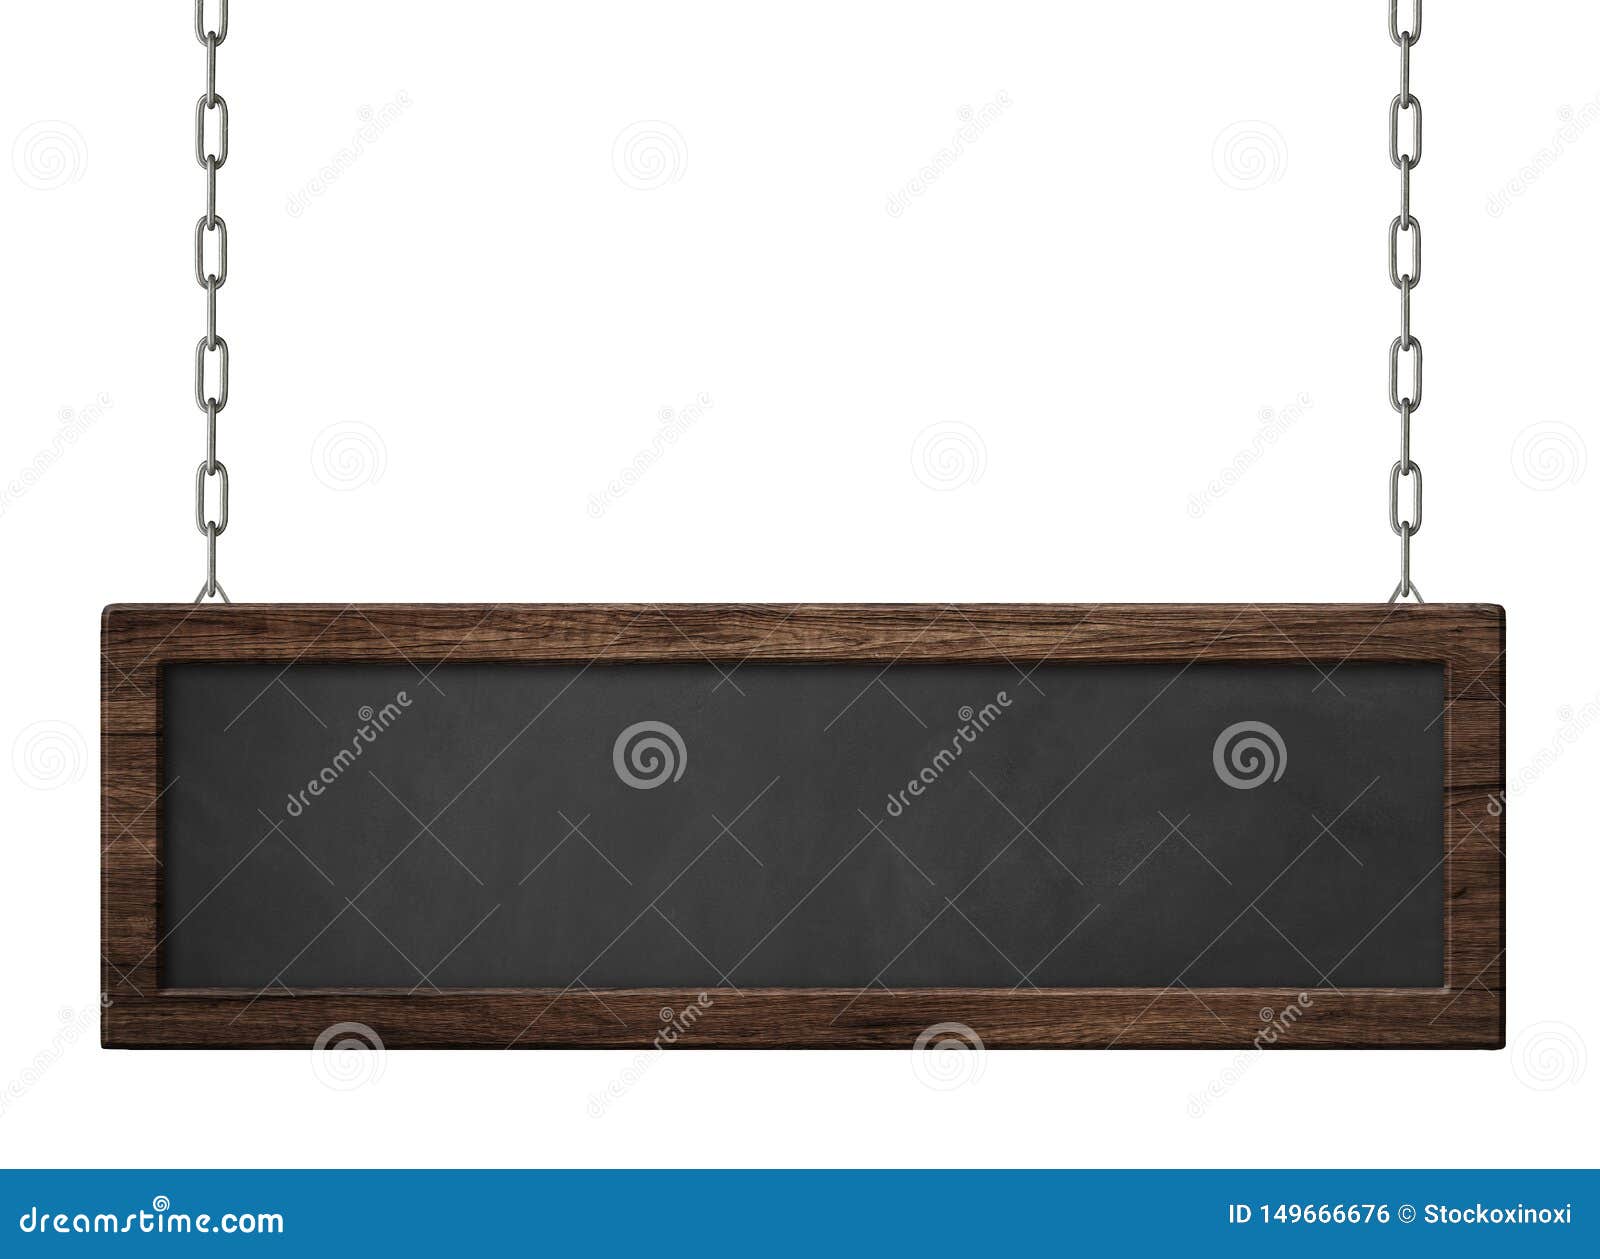 oblong blackboard with dark wooden frame hanging on chains